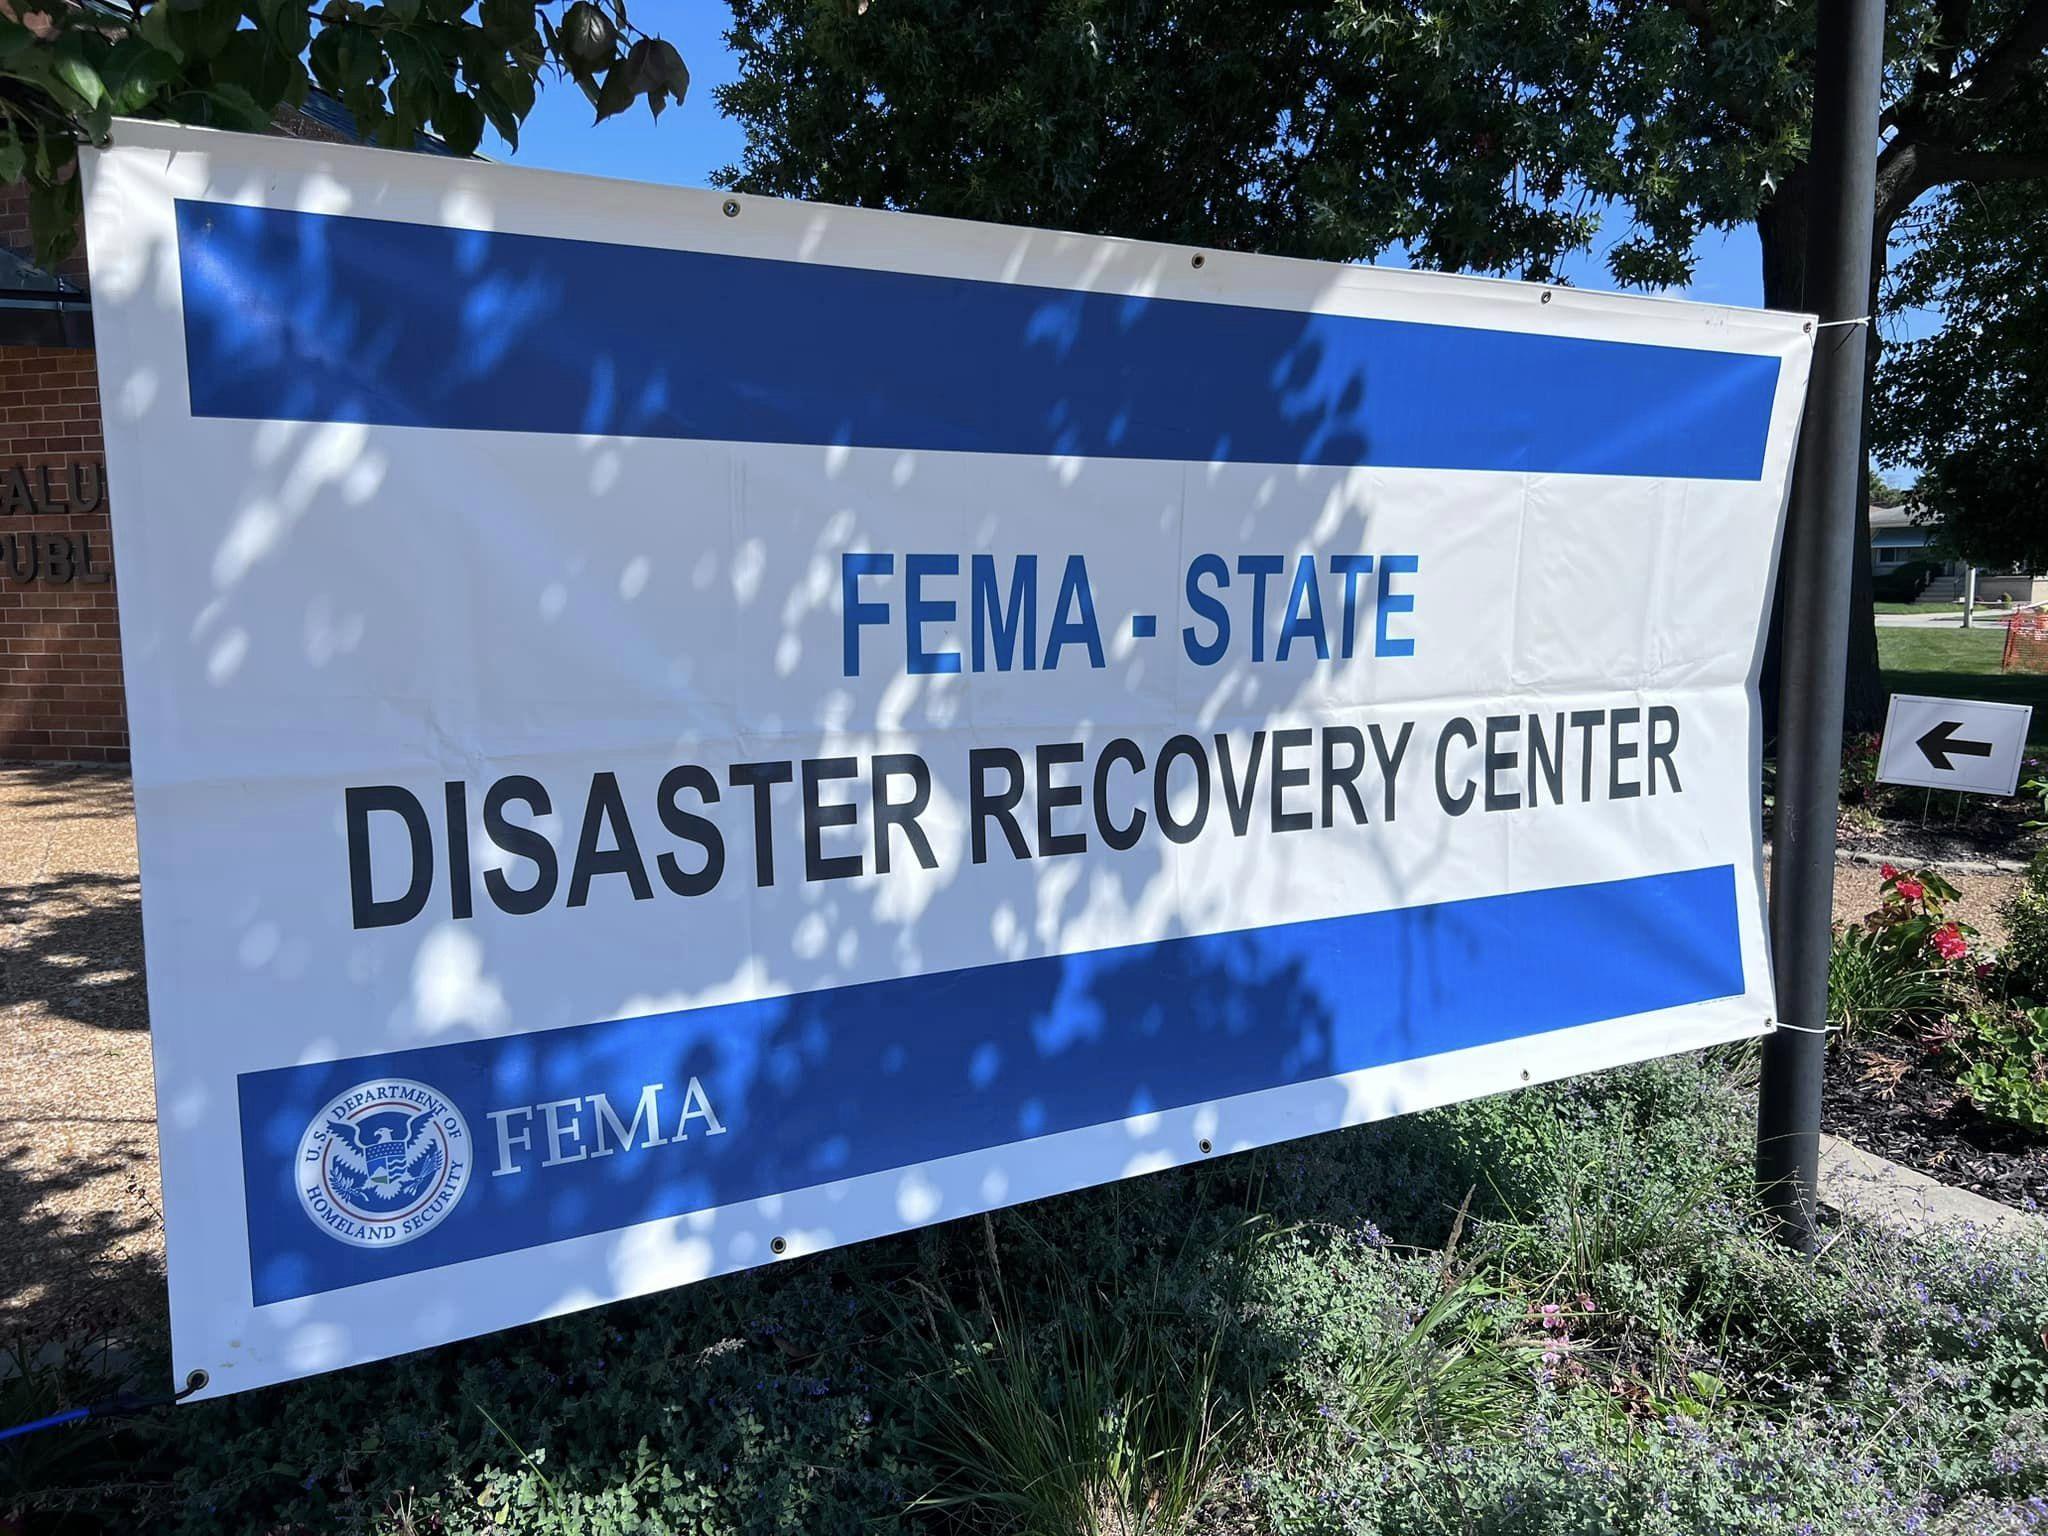 Federal Emergency Management Agency had just opened a Disaster Recovery Center in Calumet City Sept. 14 to assist people with claims from flooding that happened in July. (Facebook / City of Calumet City)